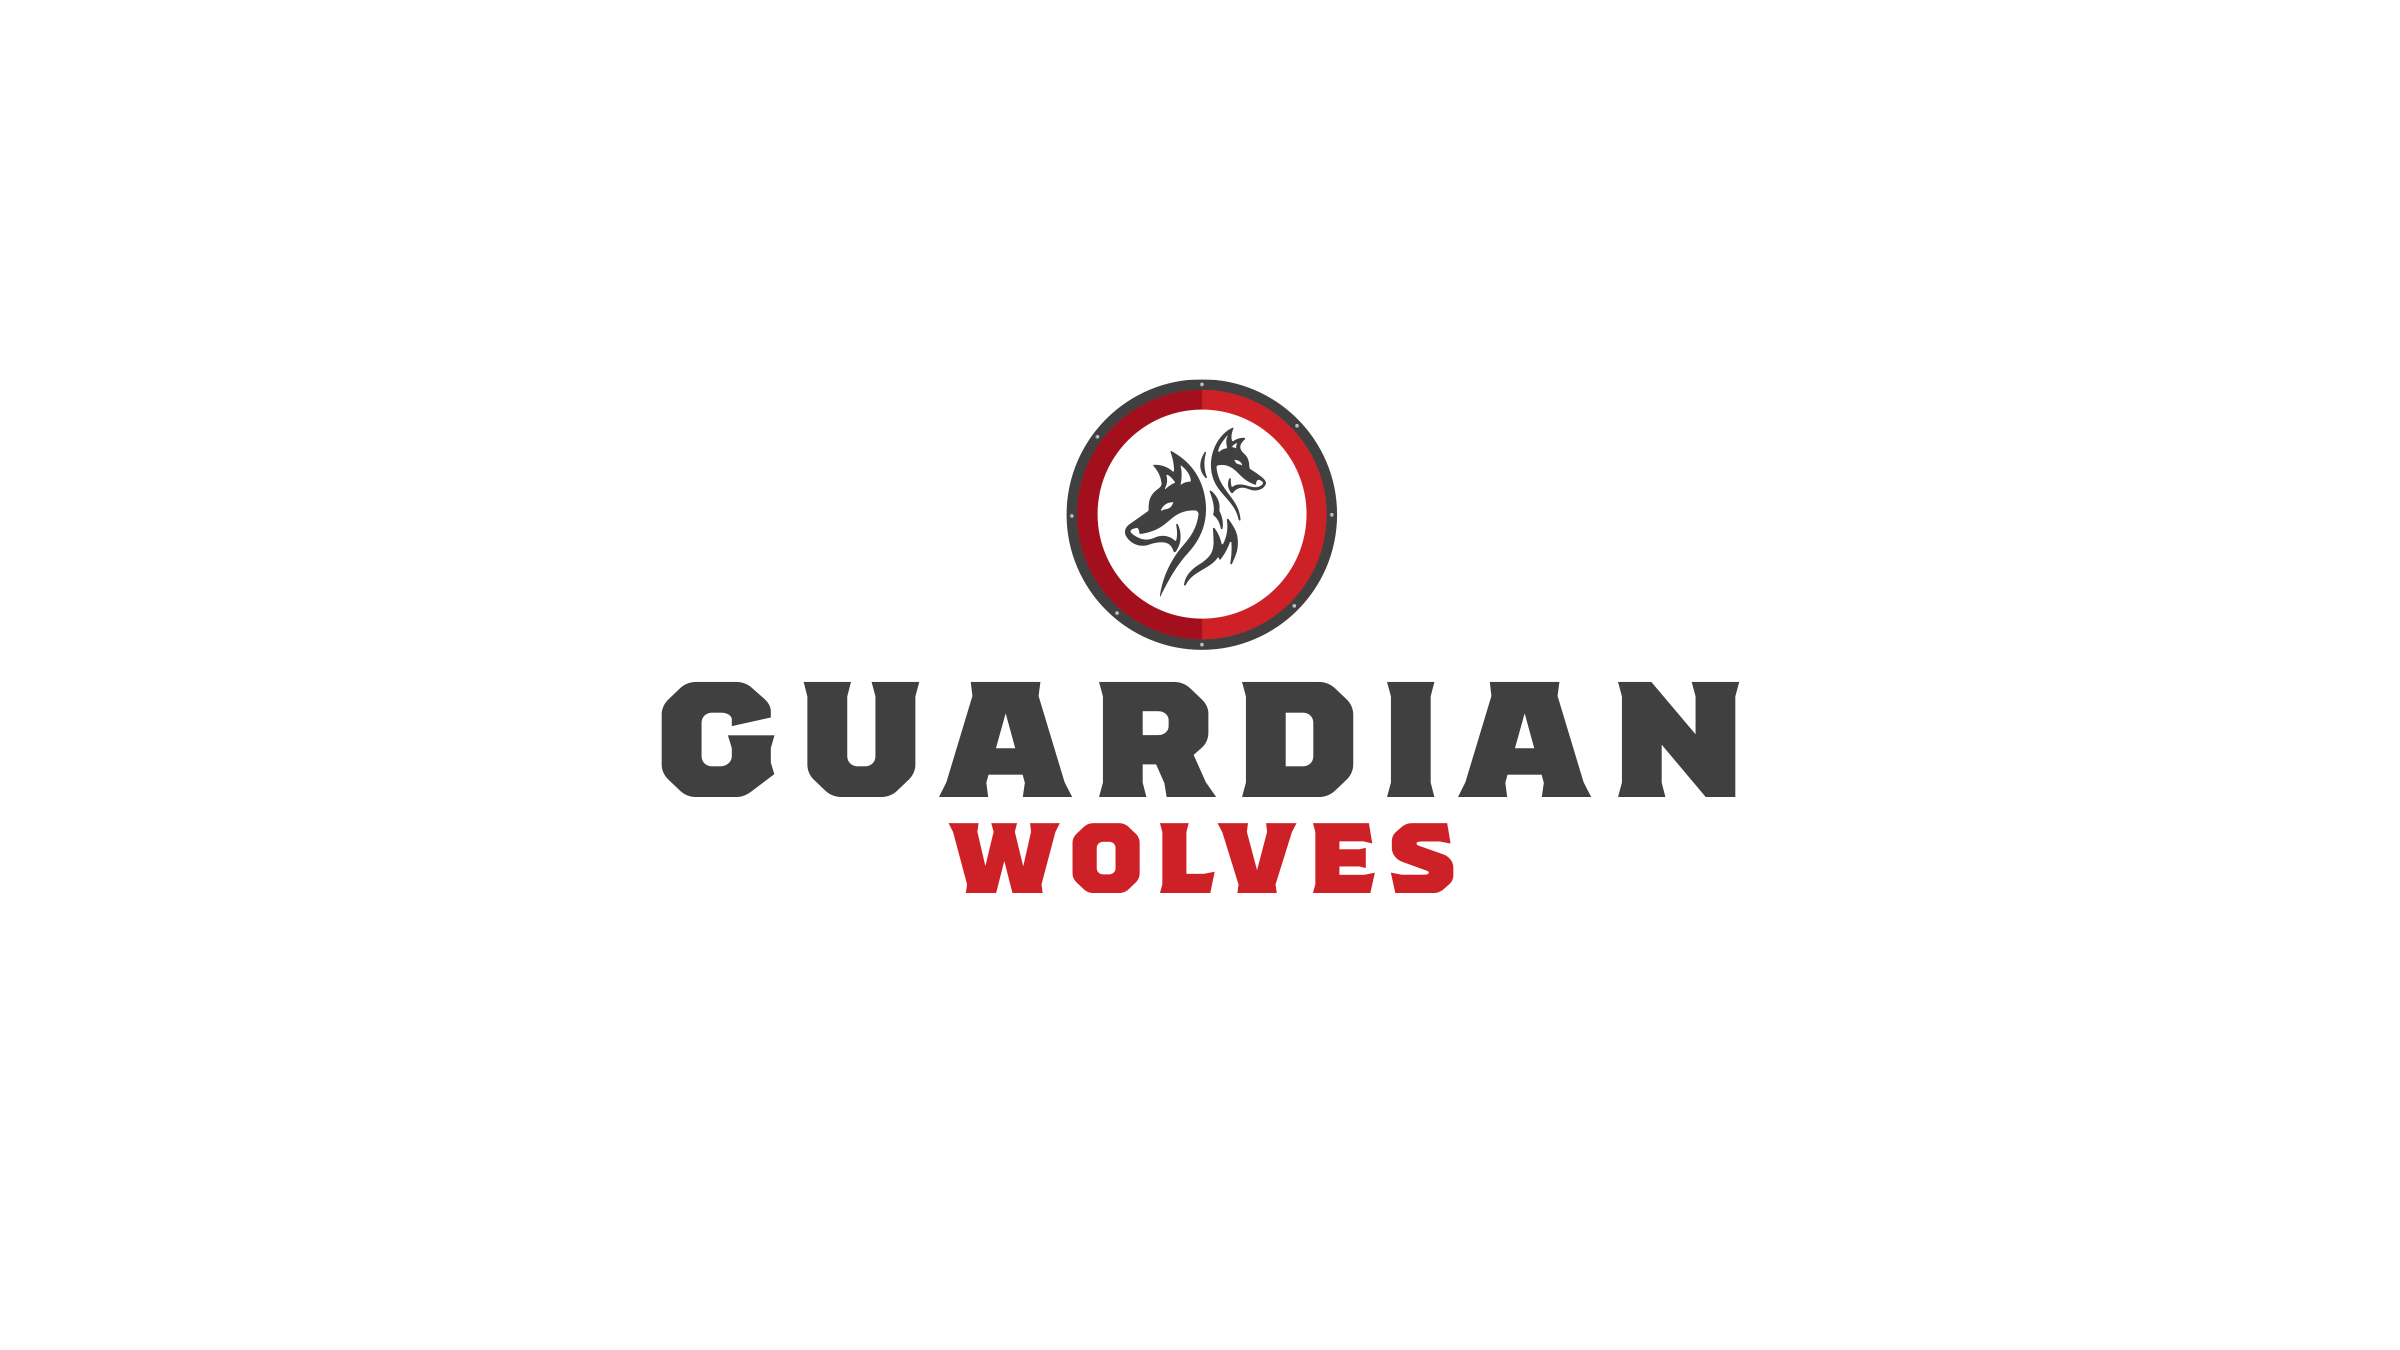 McLean-Roberts-Logo-Design-NC-State-Atheltcics-Wolfpack-Club-Guardian-Wolves.png